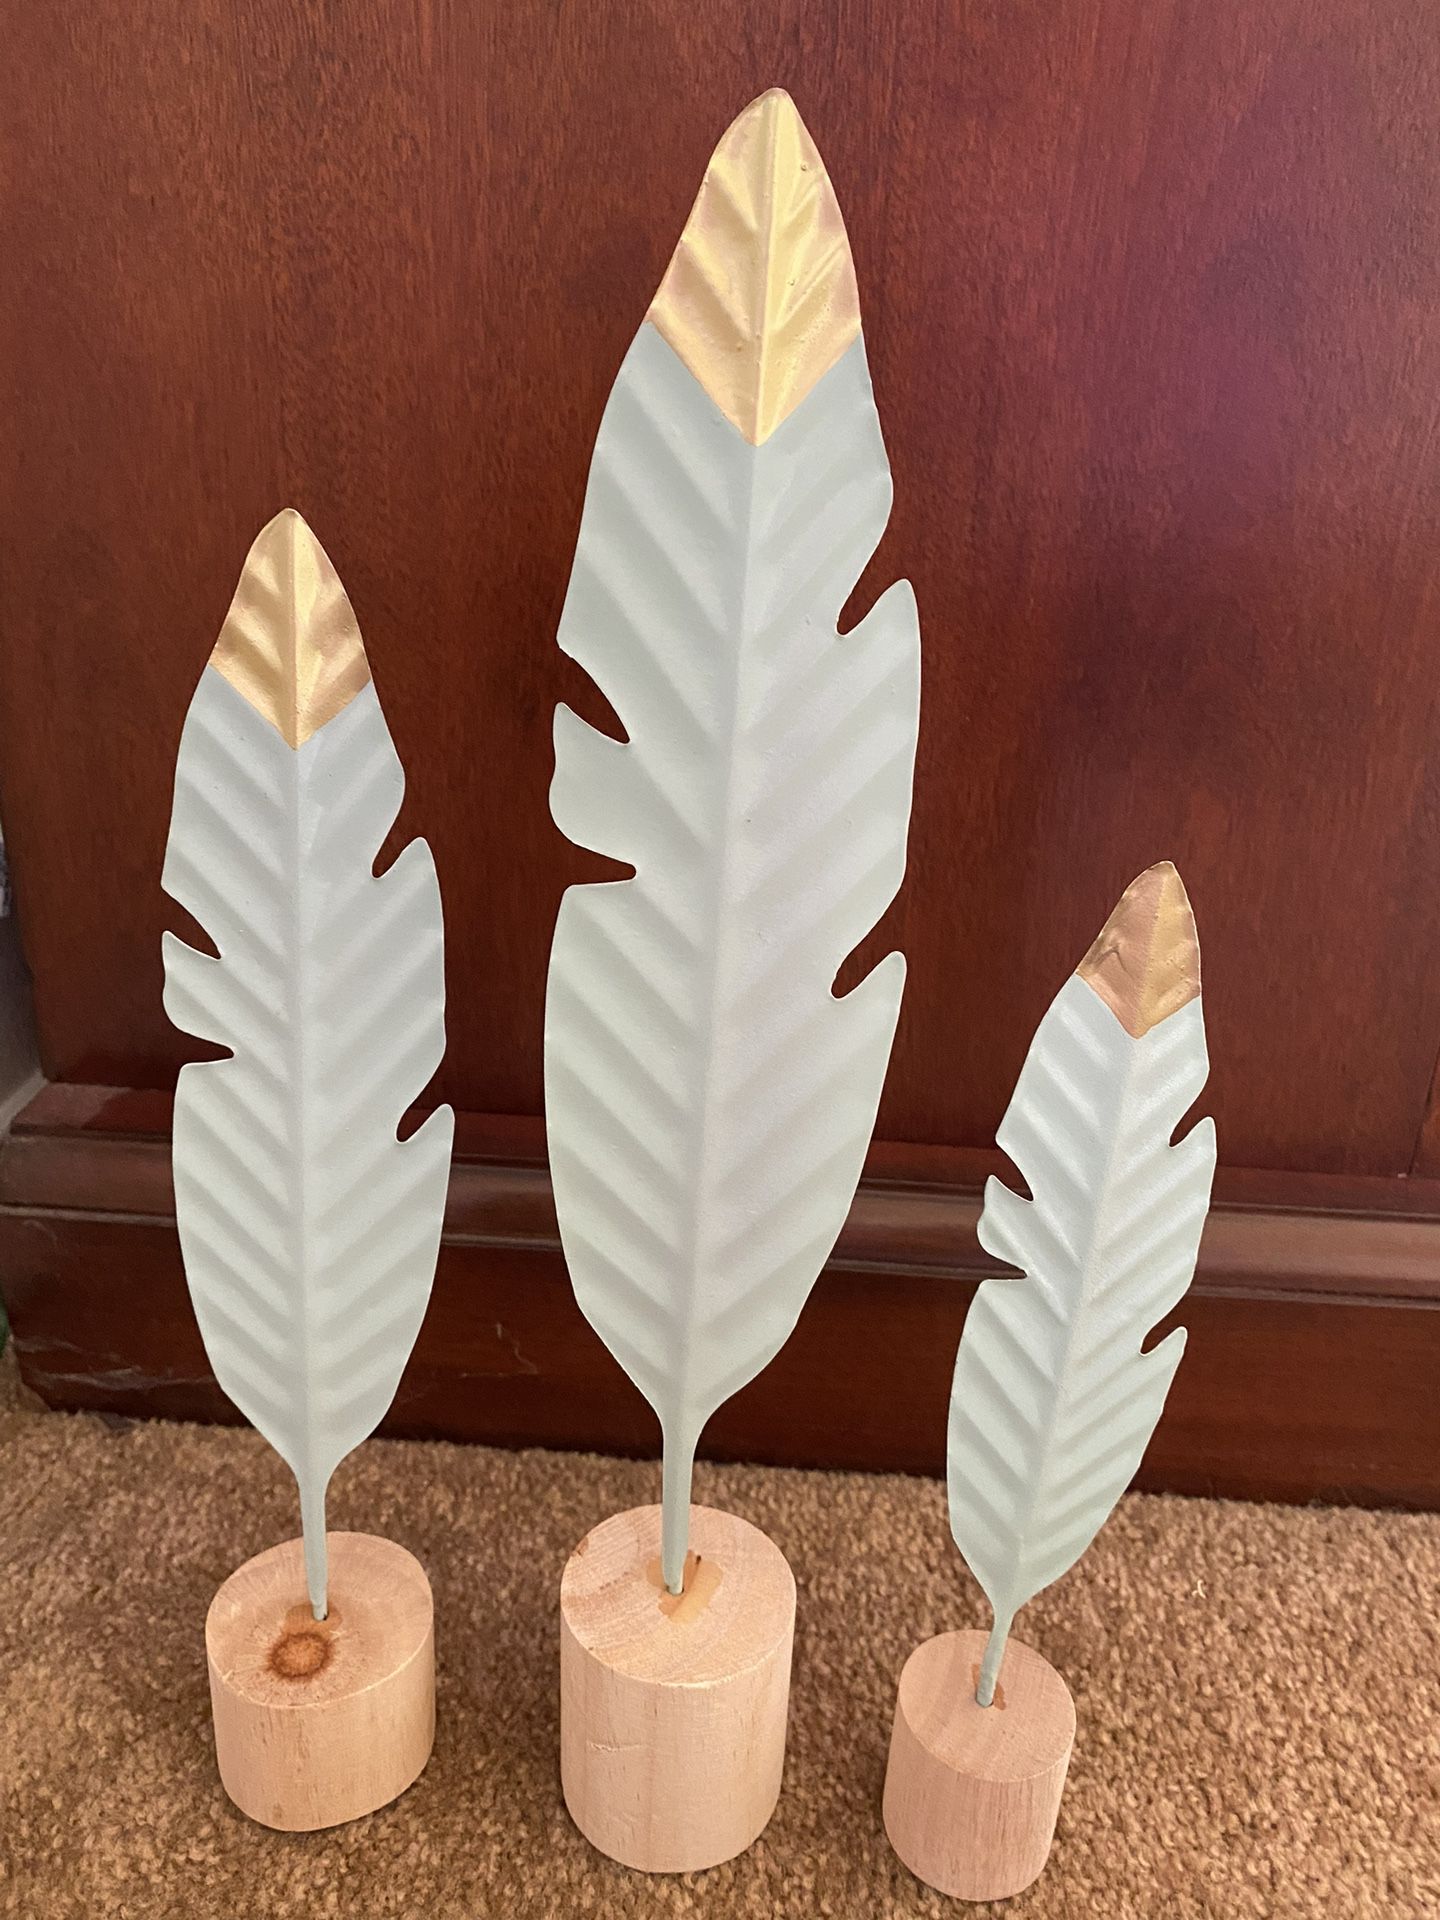 3-piece Iron Feather Metal Decorations-10”, 12”and 14” tall